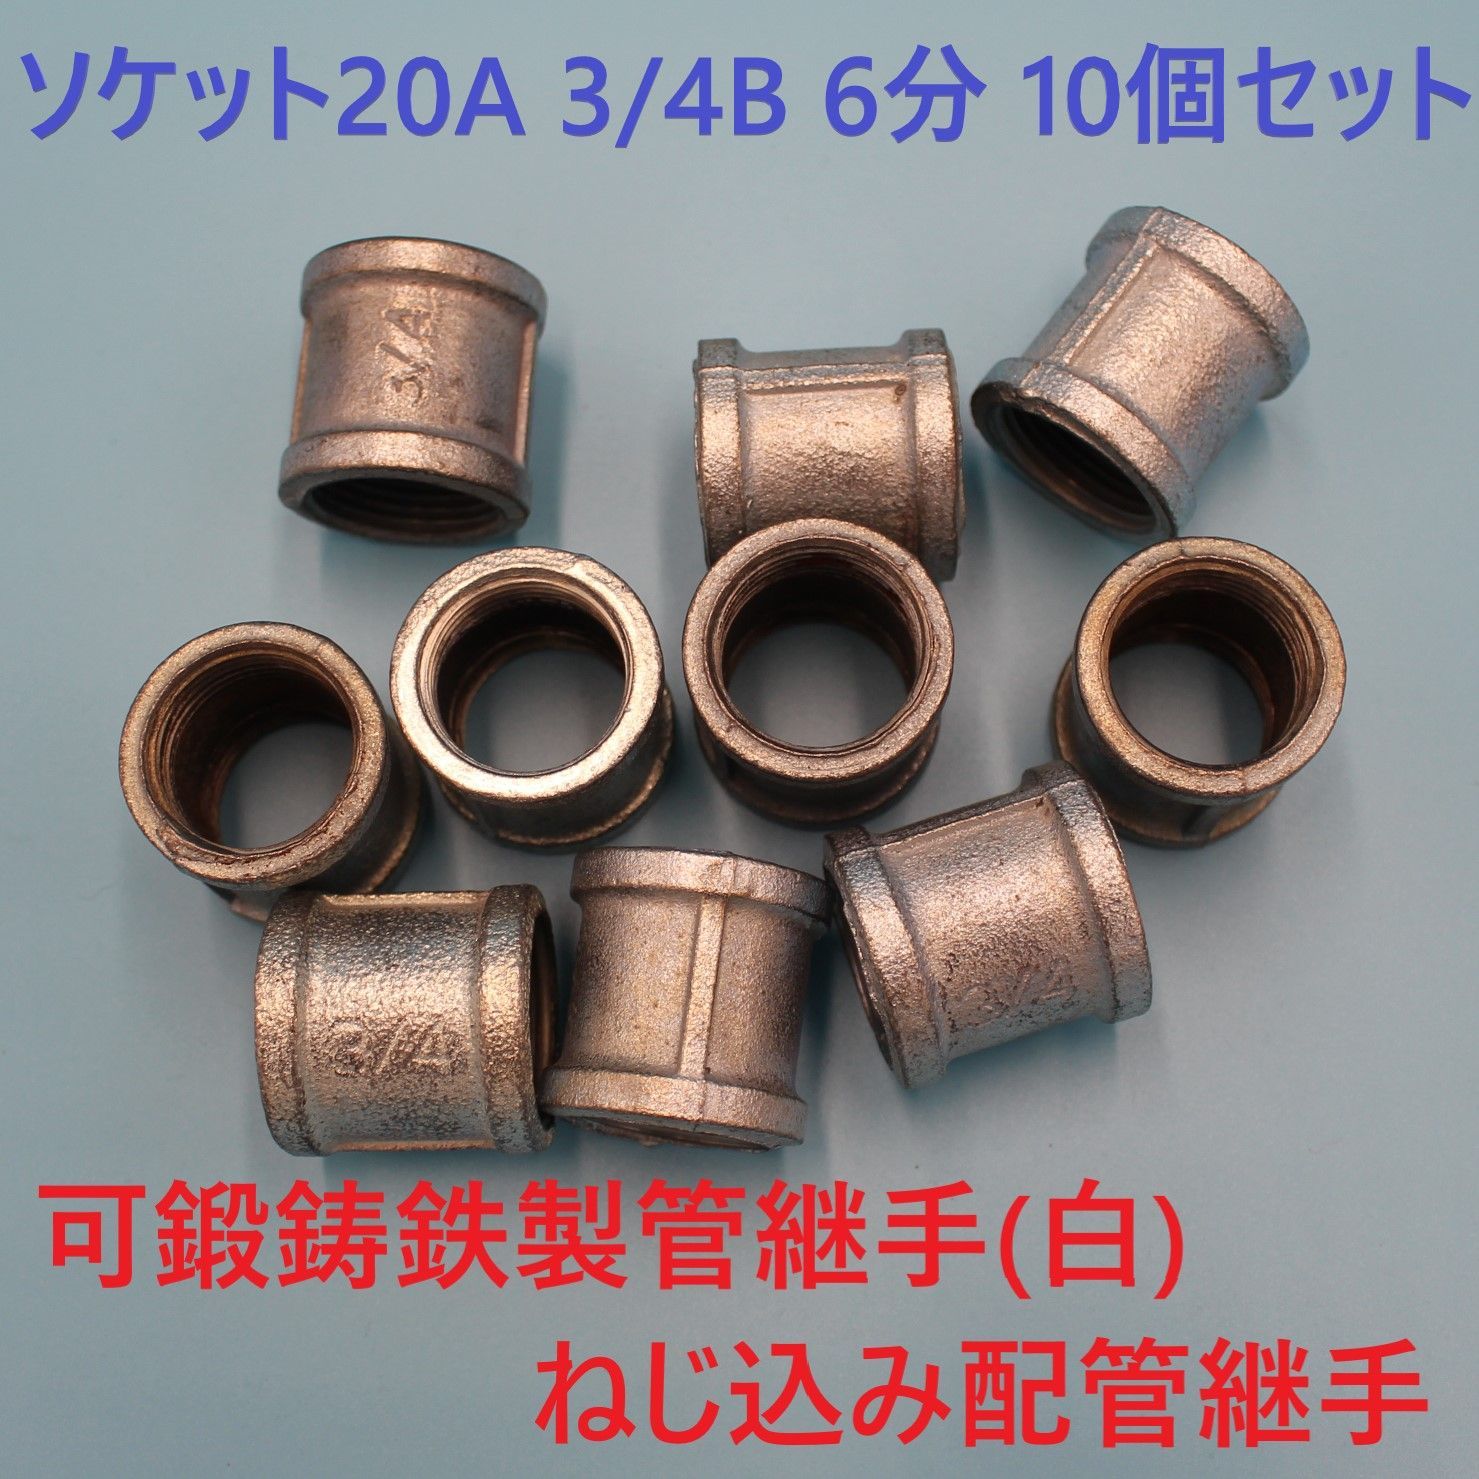 ☆JFE 鋳鉄製 (白) 径違いソケット (RS) 15A×10A (1 2×3 8) ねじ込み式